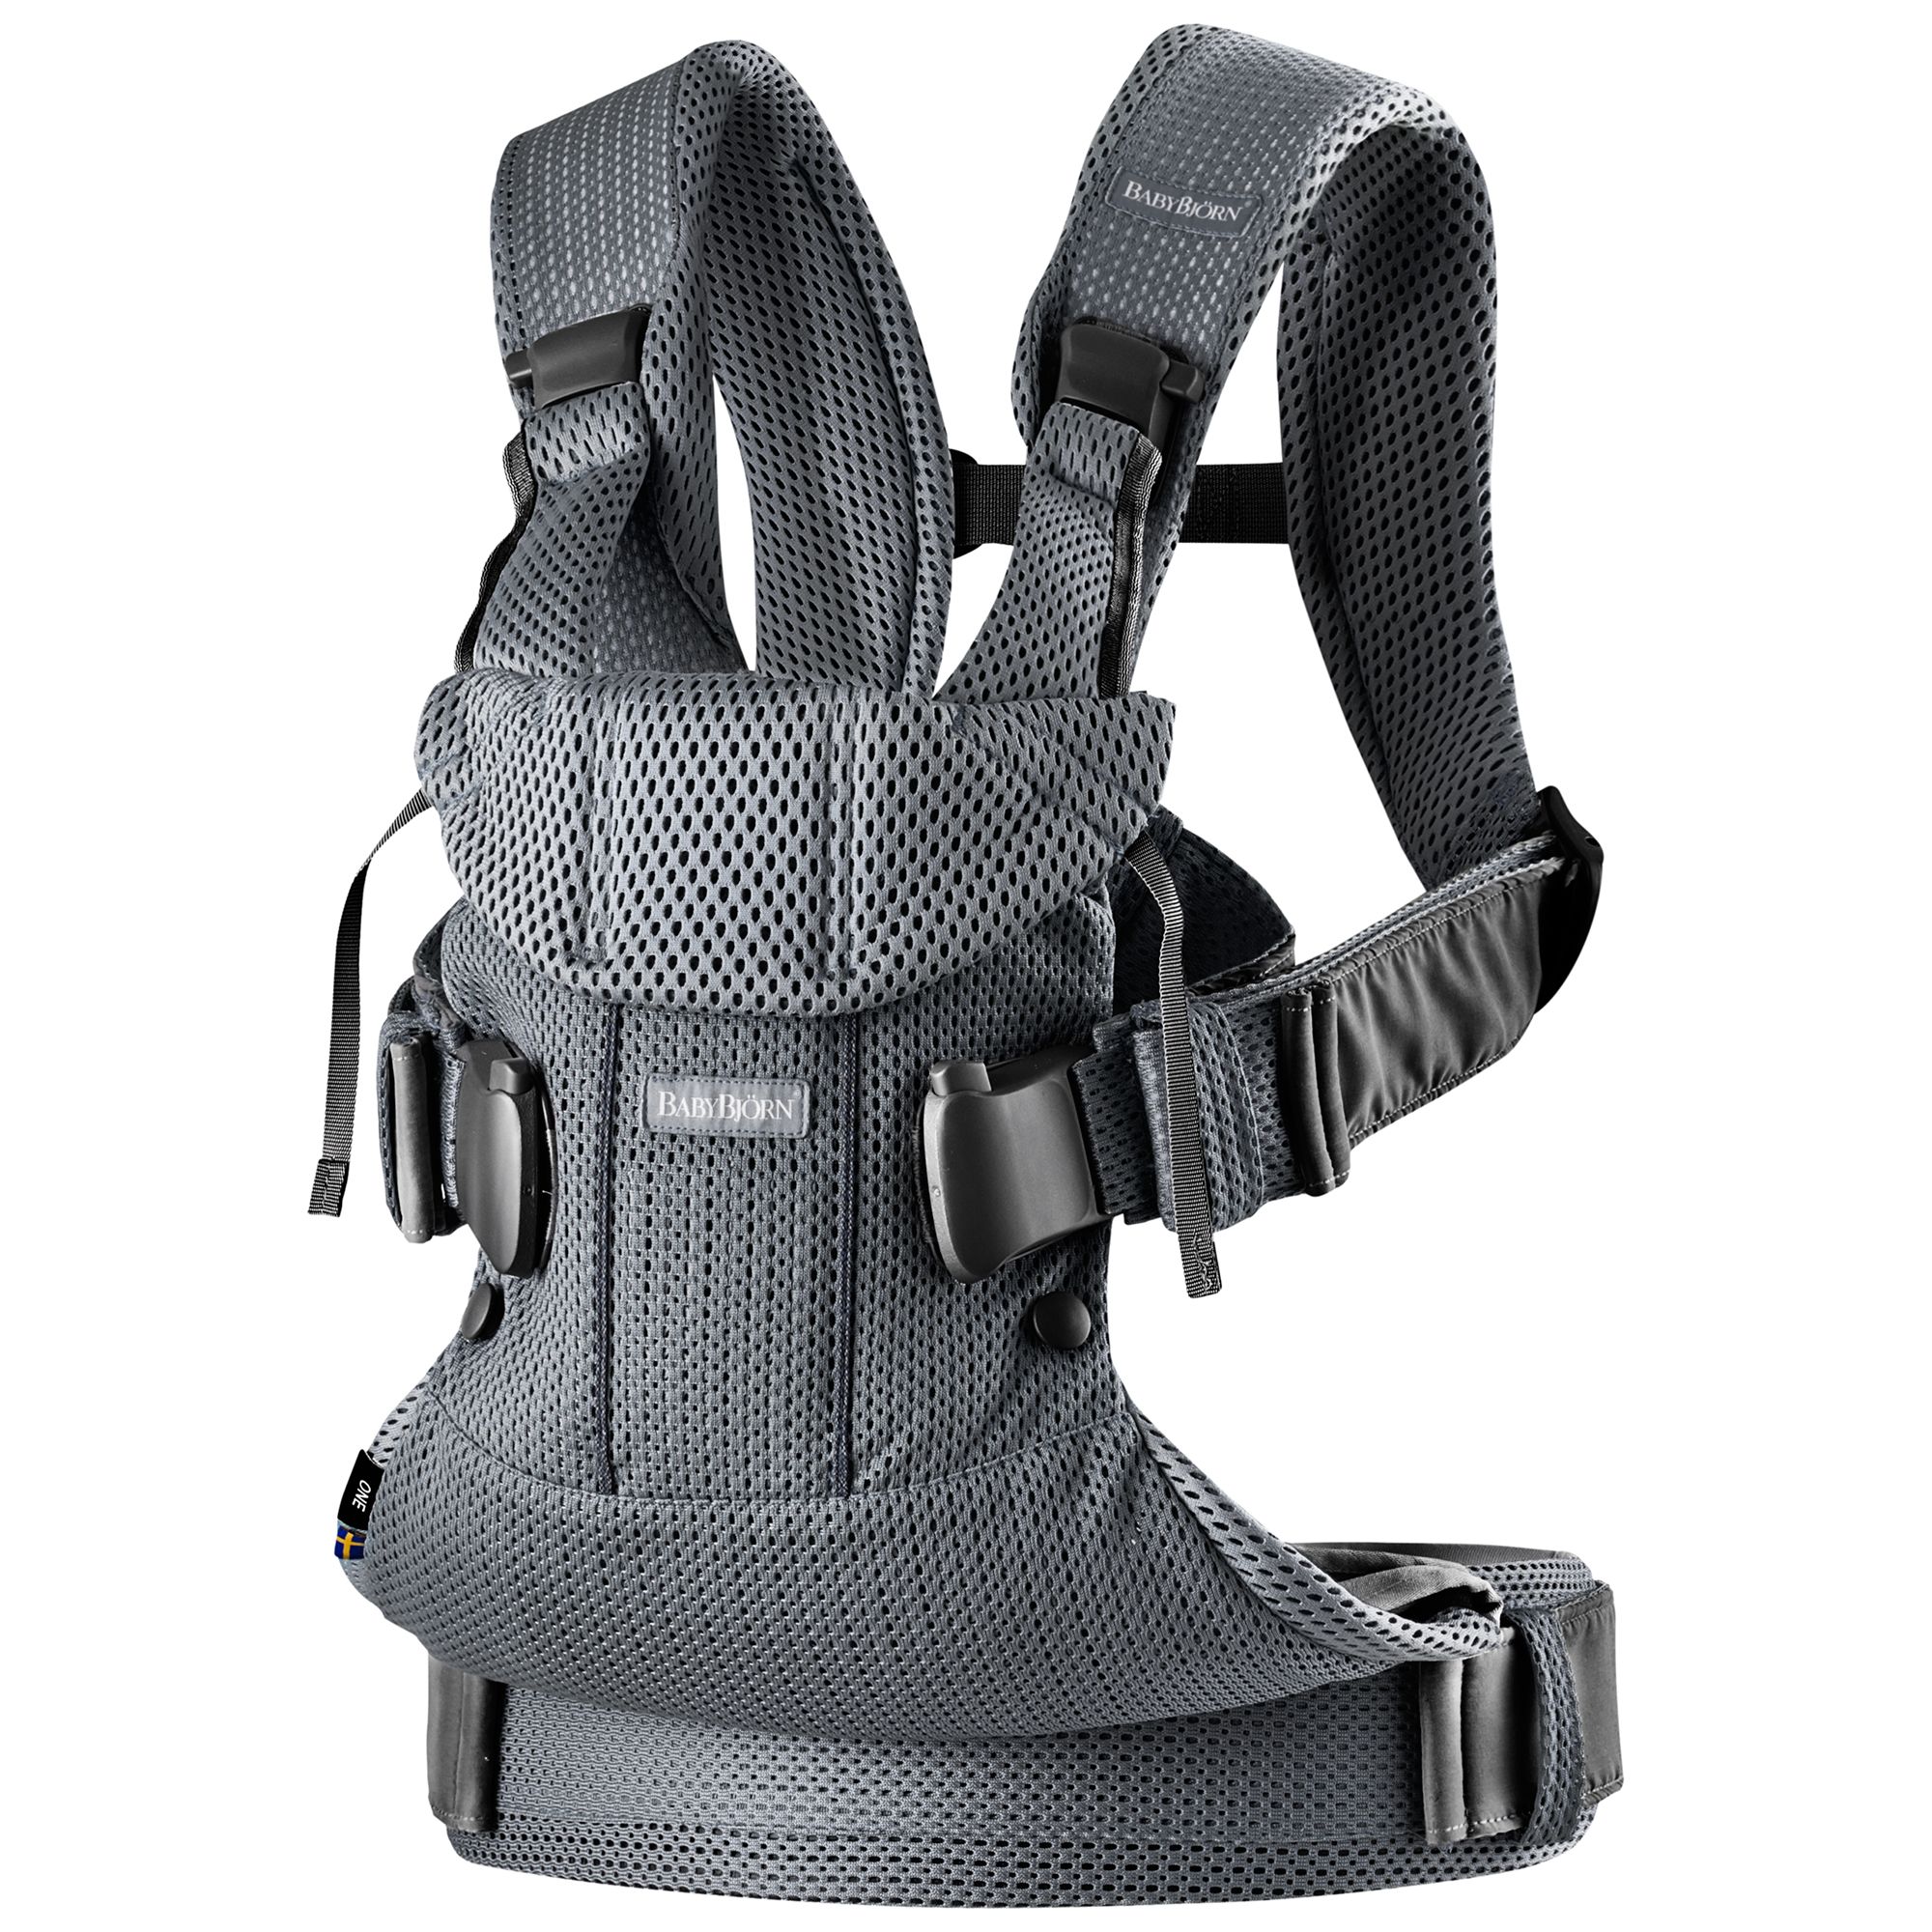 BabyBjörn Anthracite One Air Baby Carrier 2018 and Teething Bib bundle